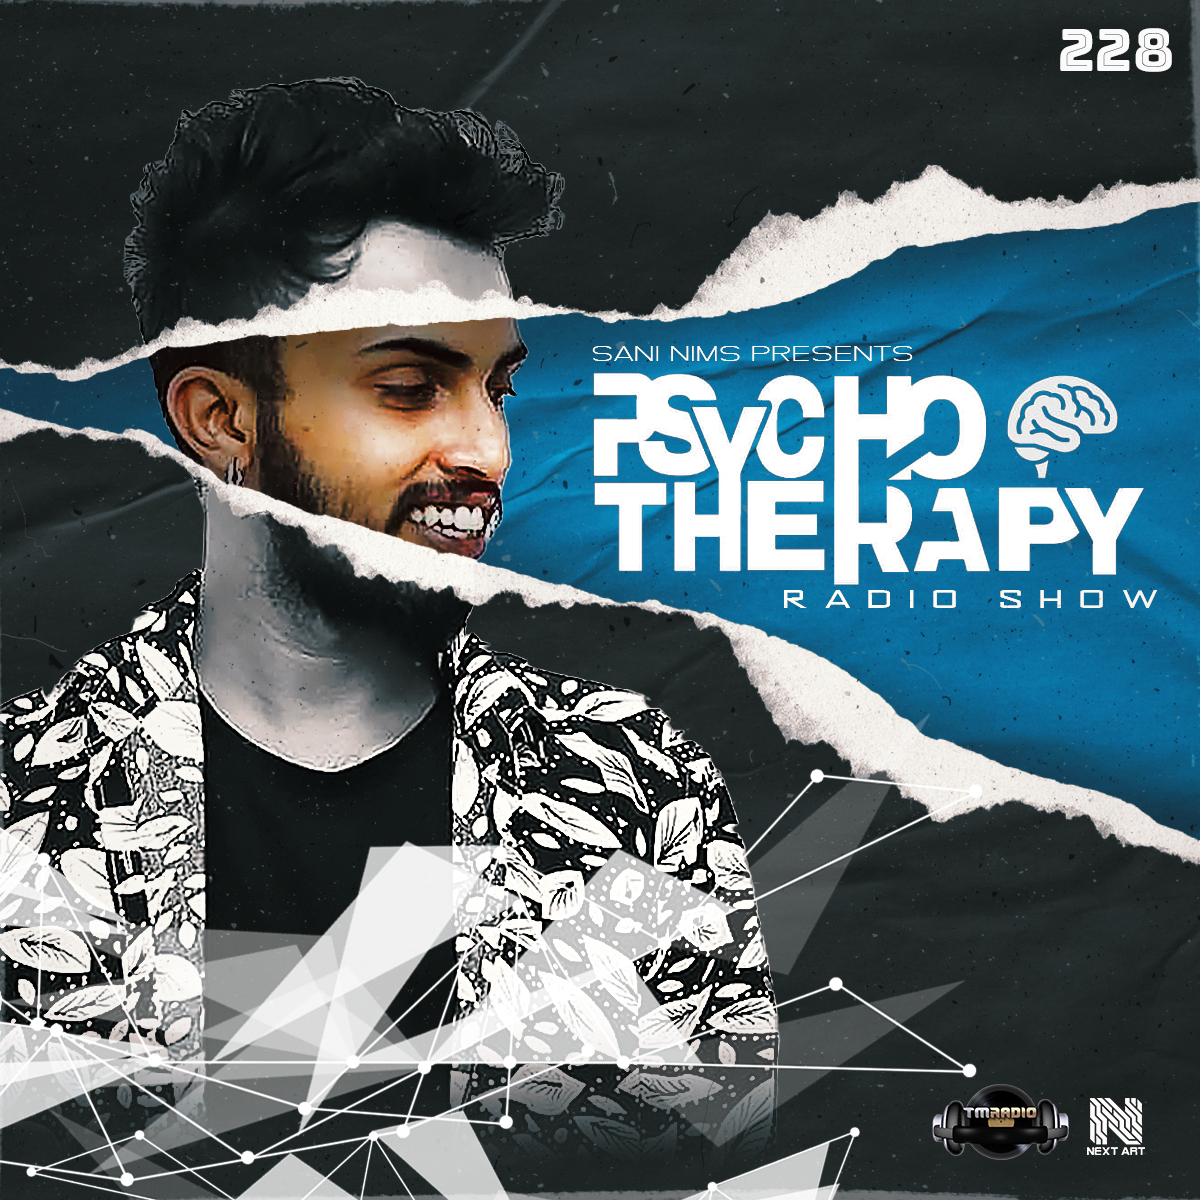 PSYCHO THERAPY EP 228 BY SANI NIMS ON TM RADIO (from February 15th, 2023)